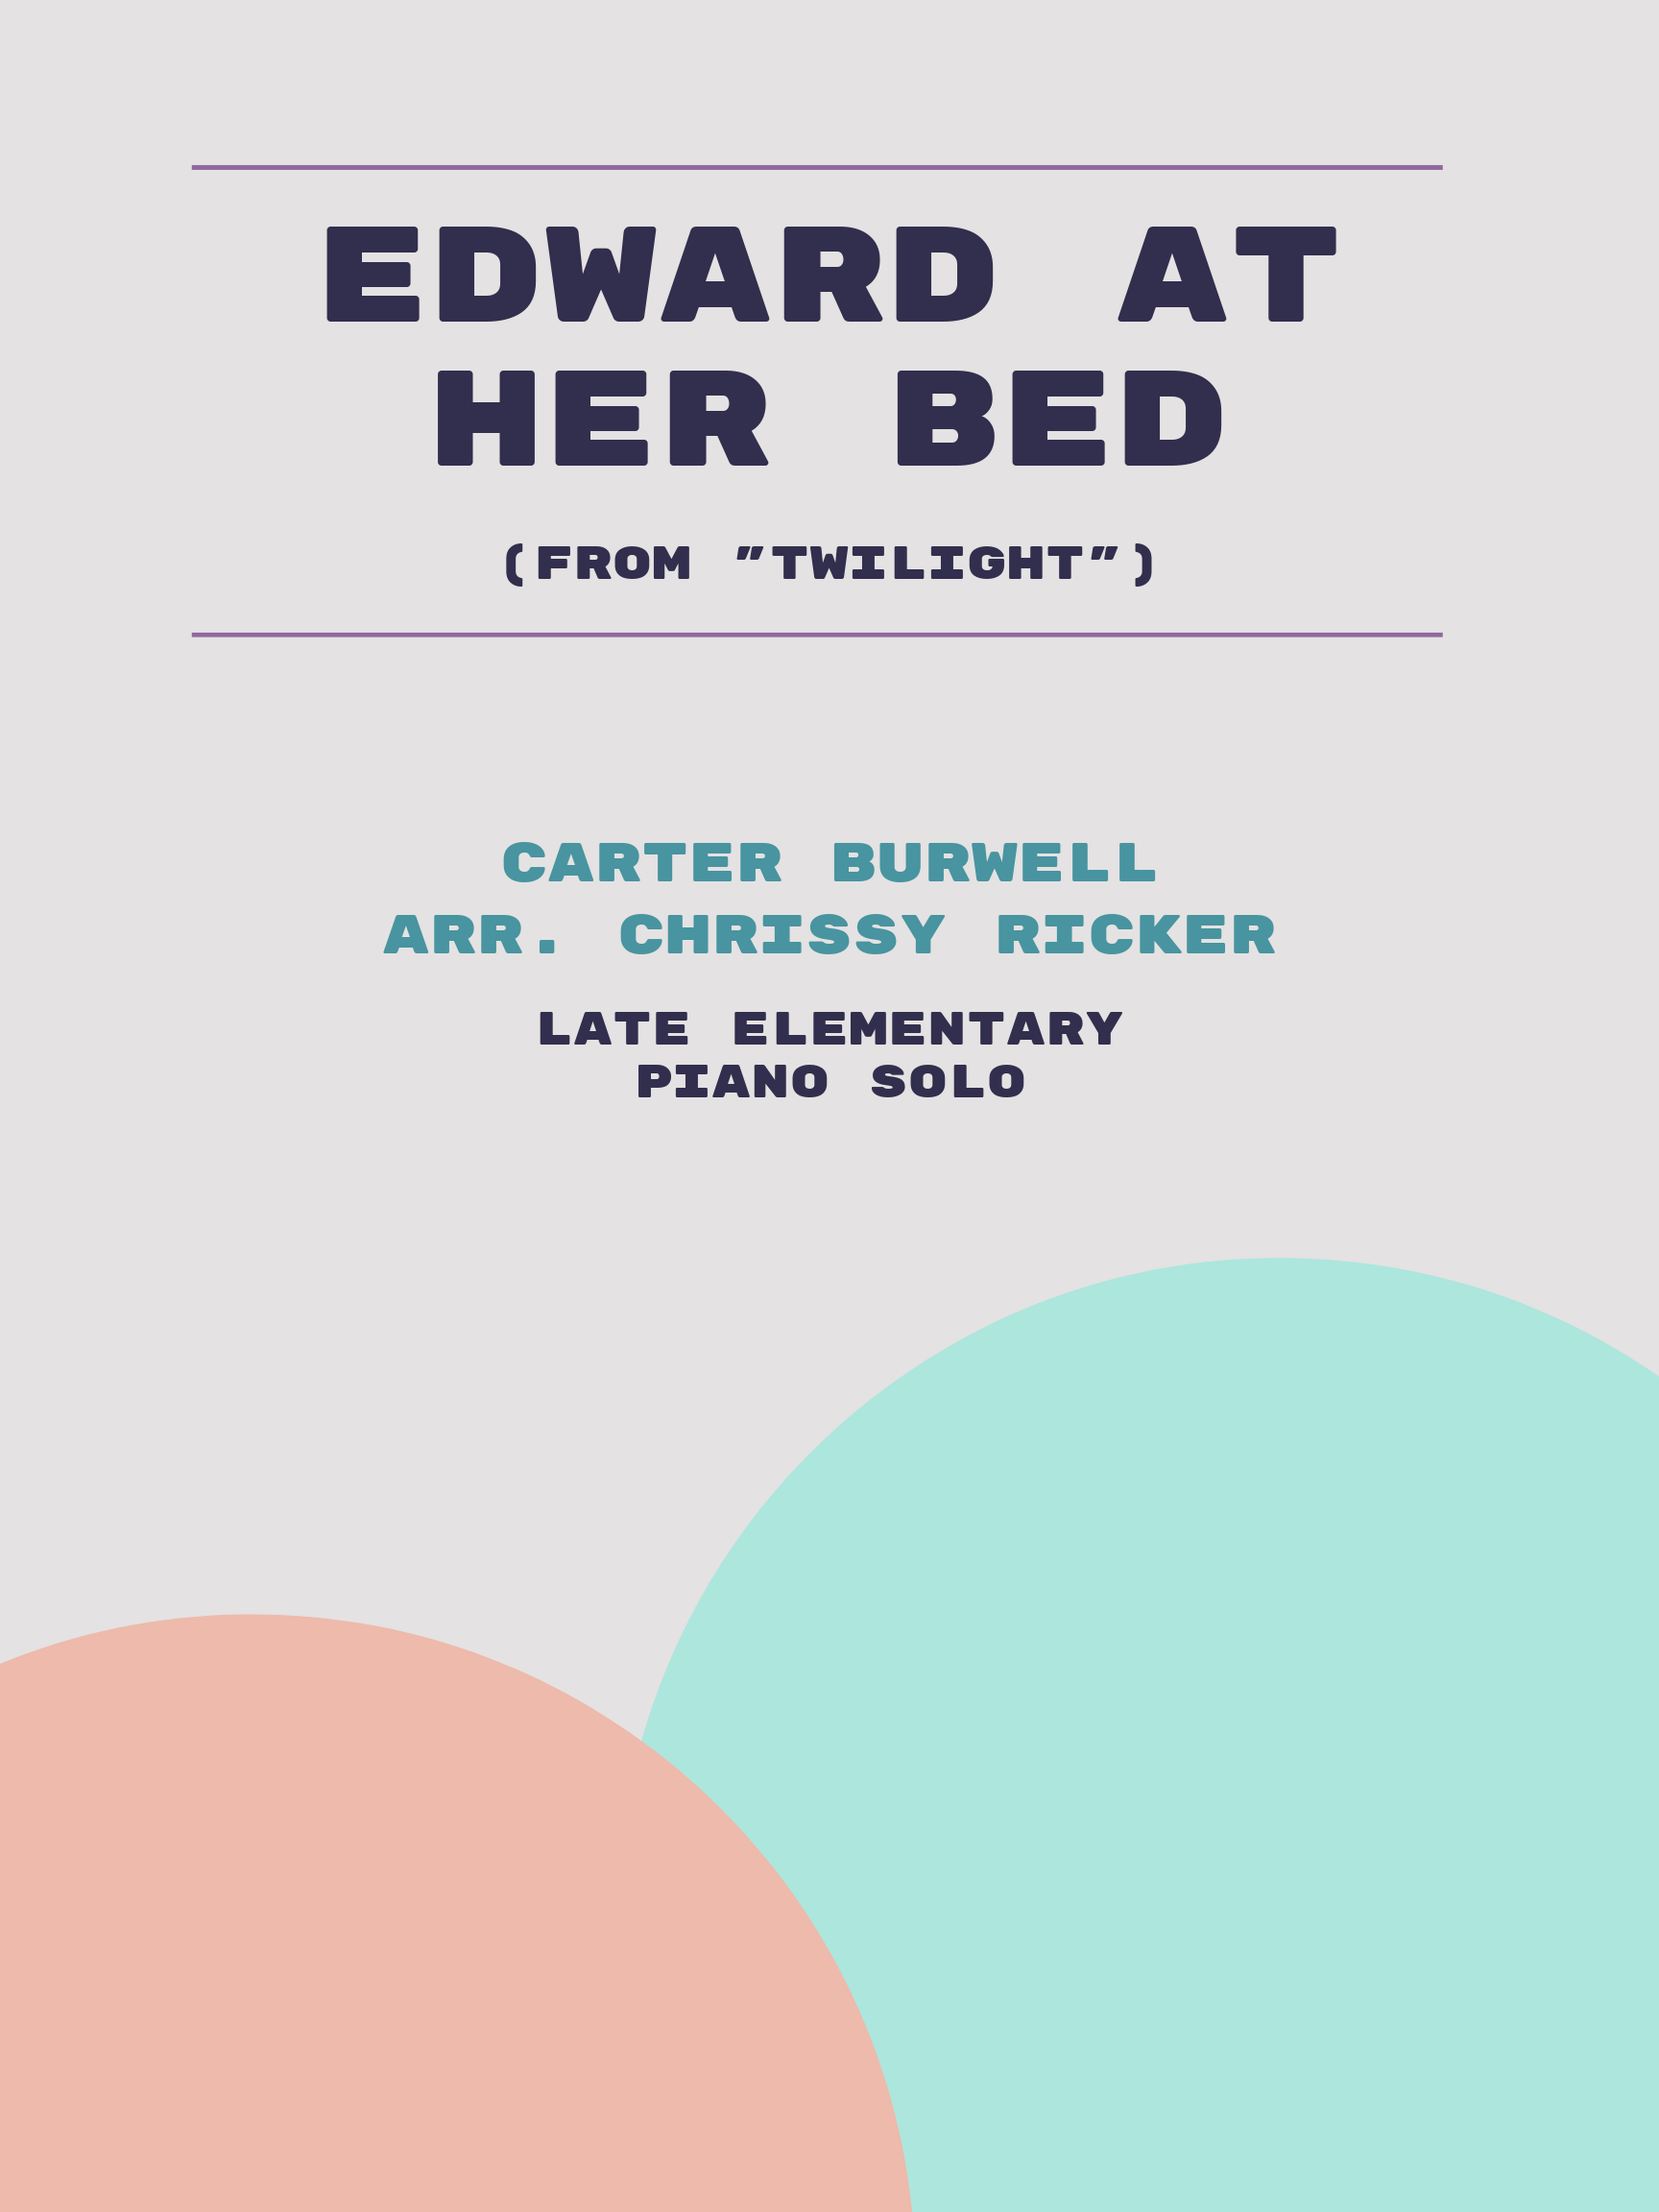 Edward at Her Bed by Carter Burwell